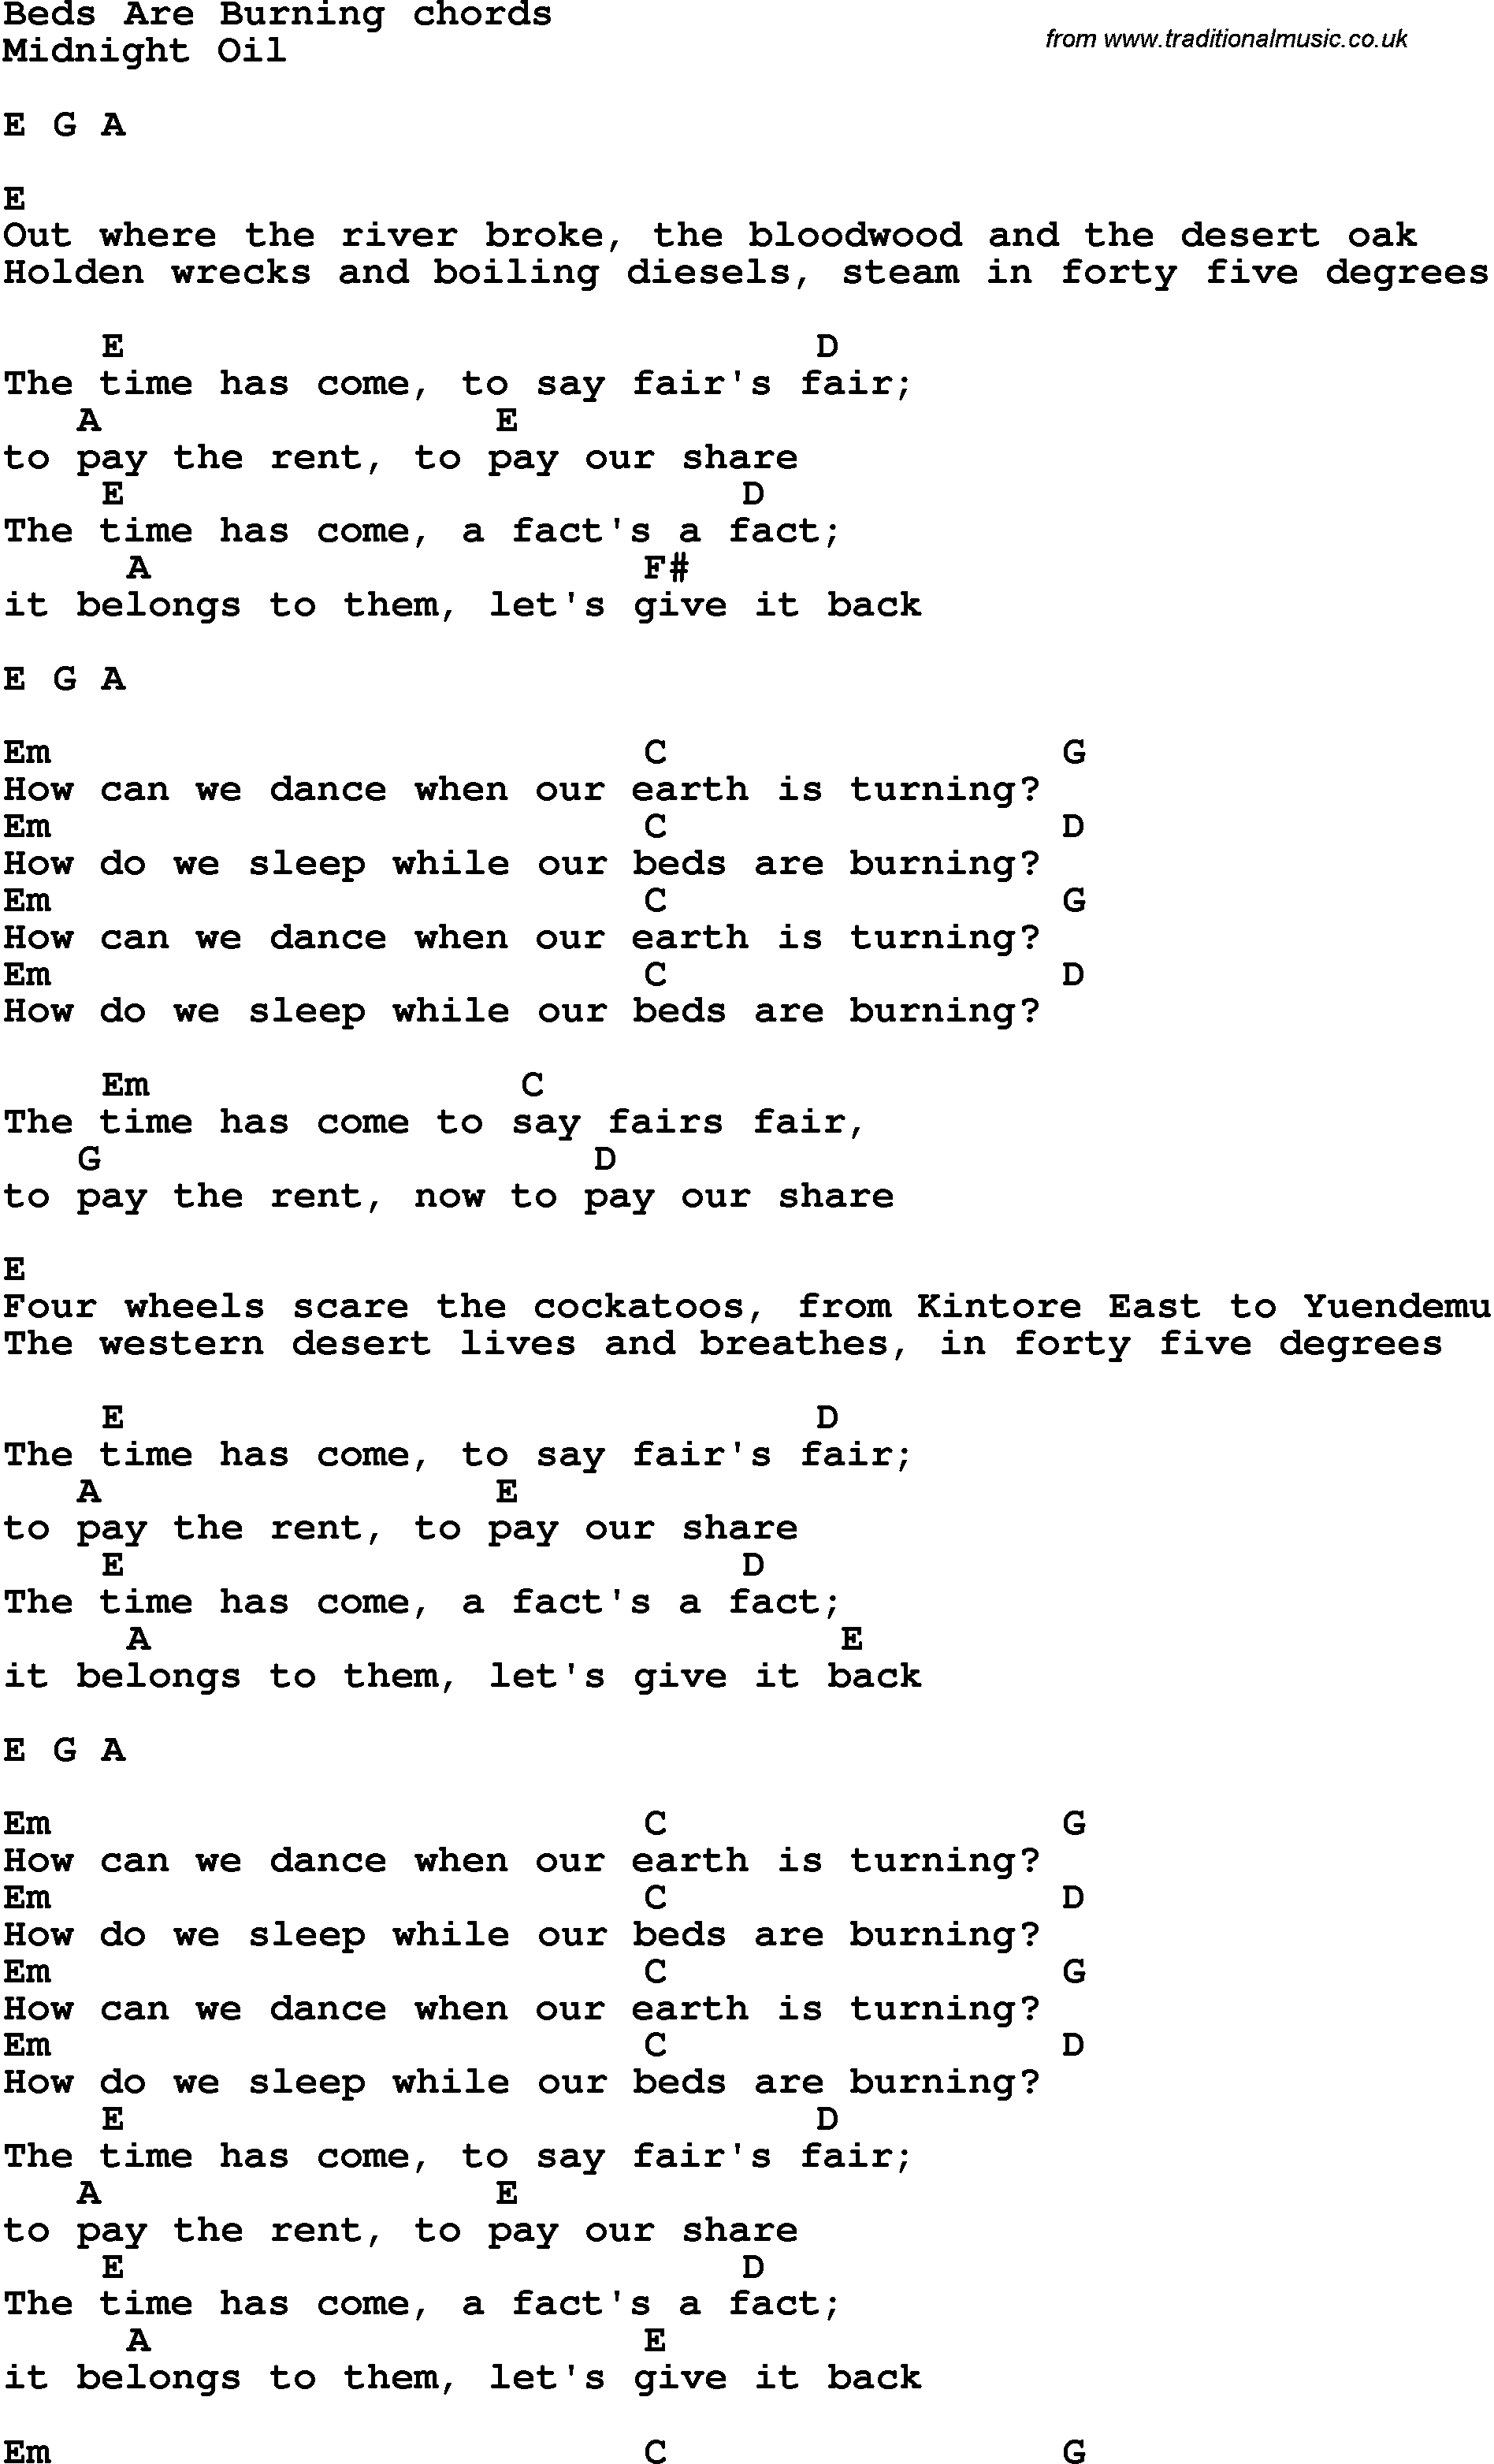 Song Lyrics with guitar chords for Beds Are Burning